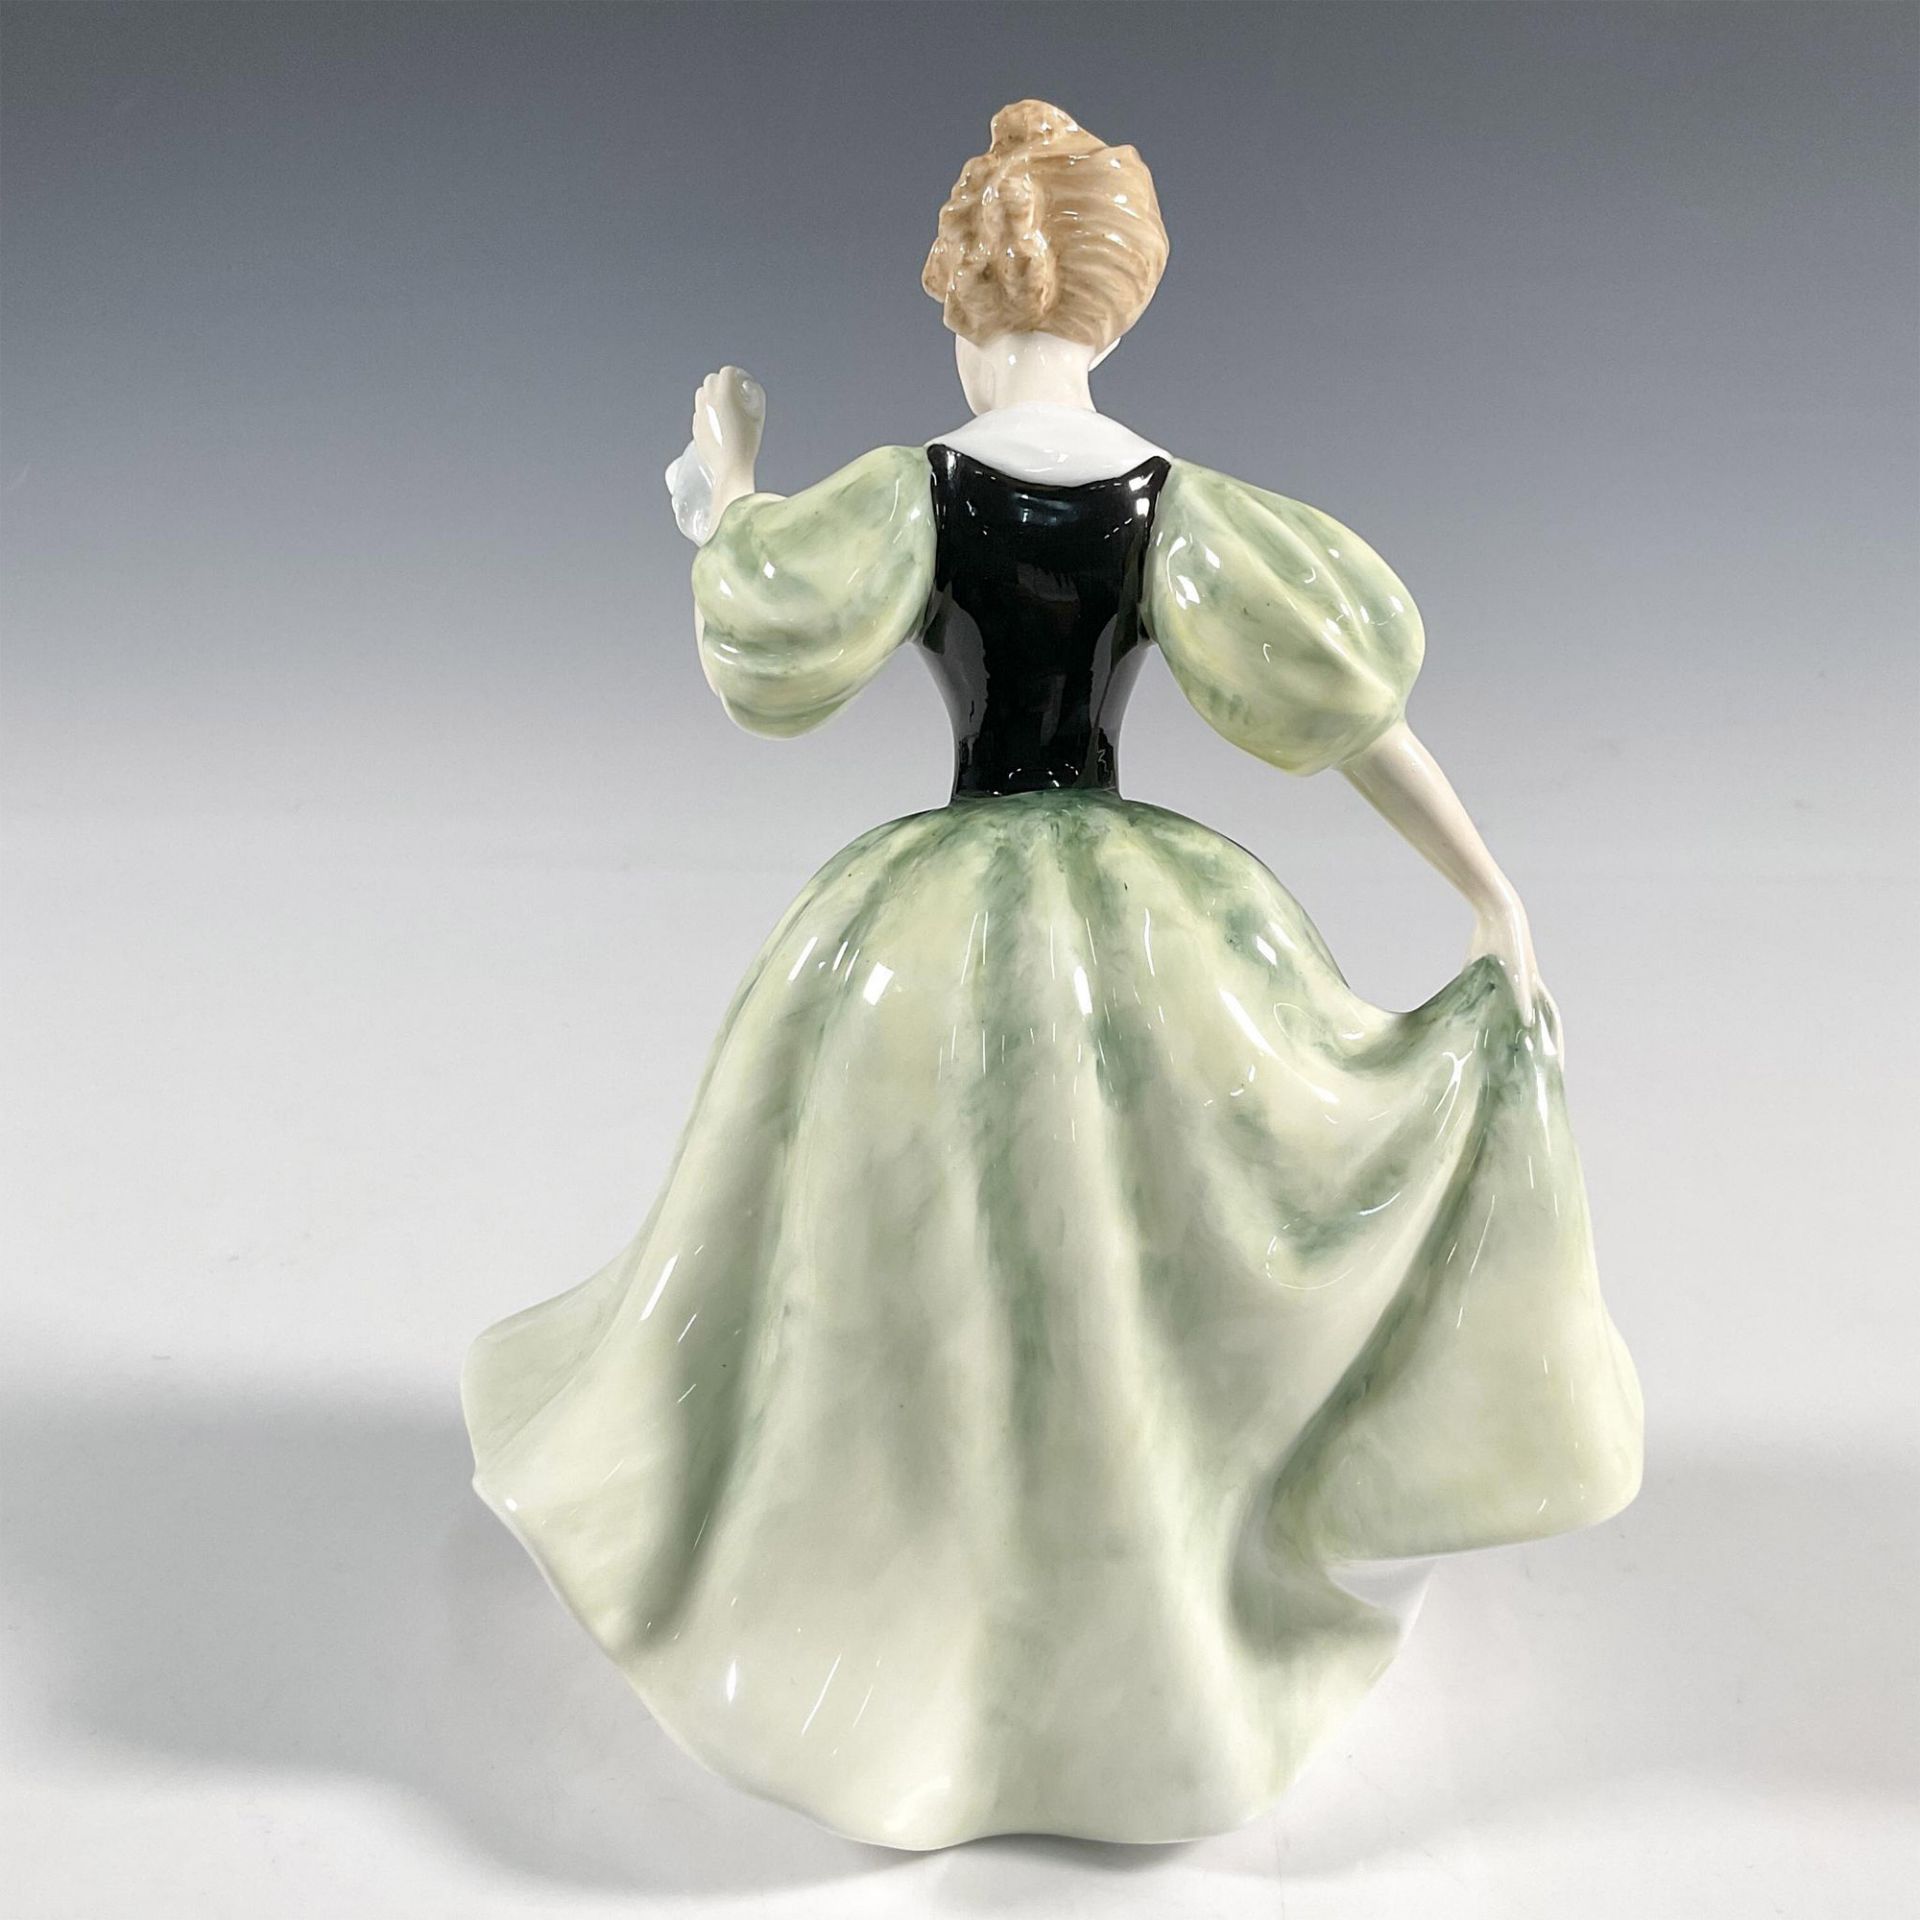 Lily - HN3902 - Royal Doulton Figurine - Image 2 of 3